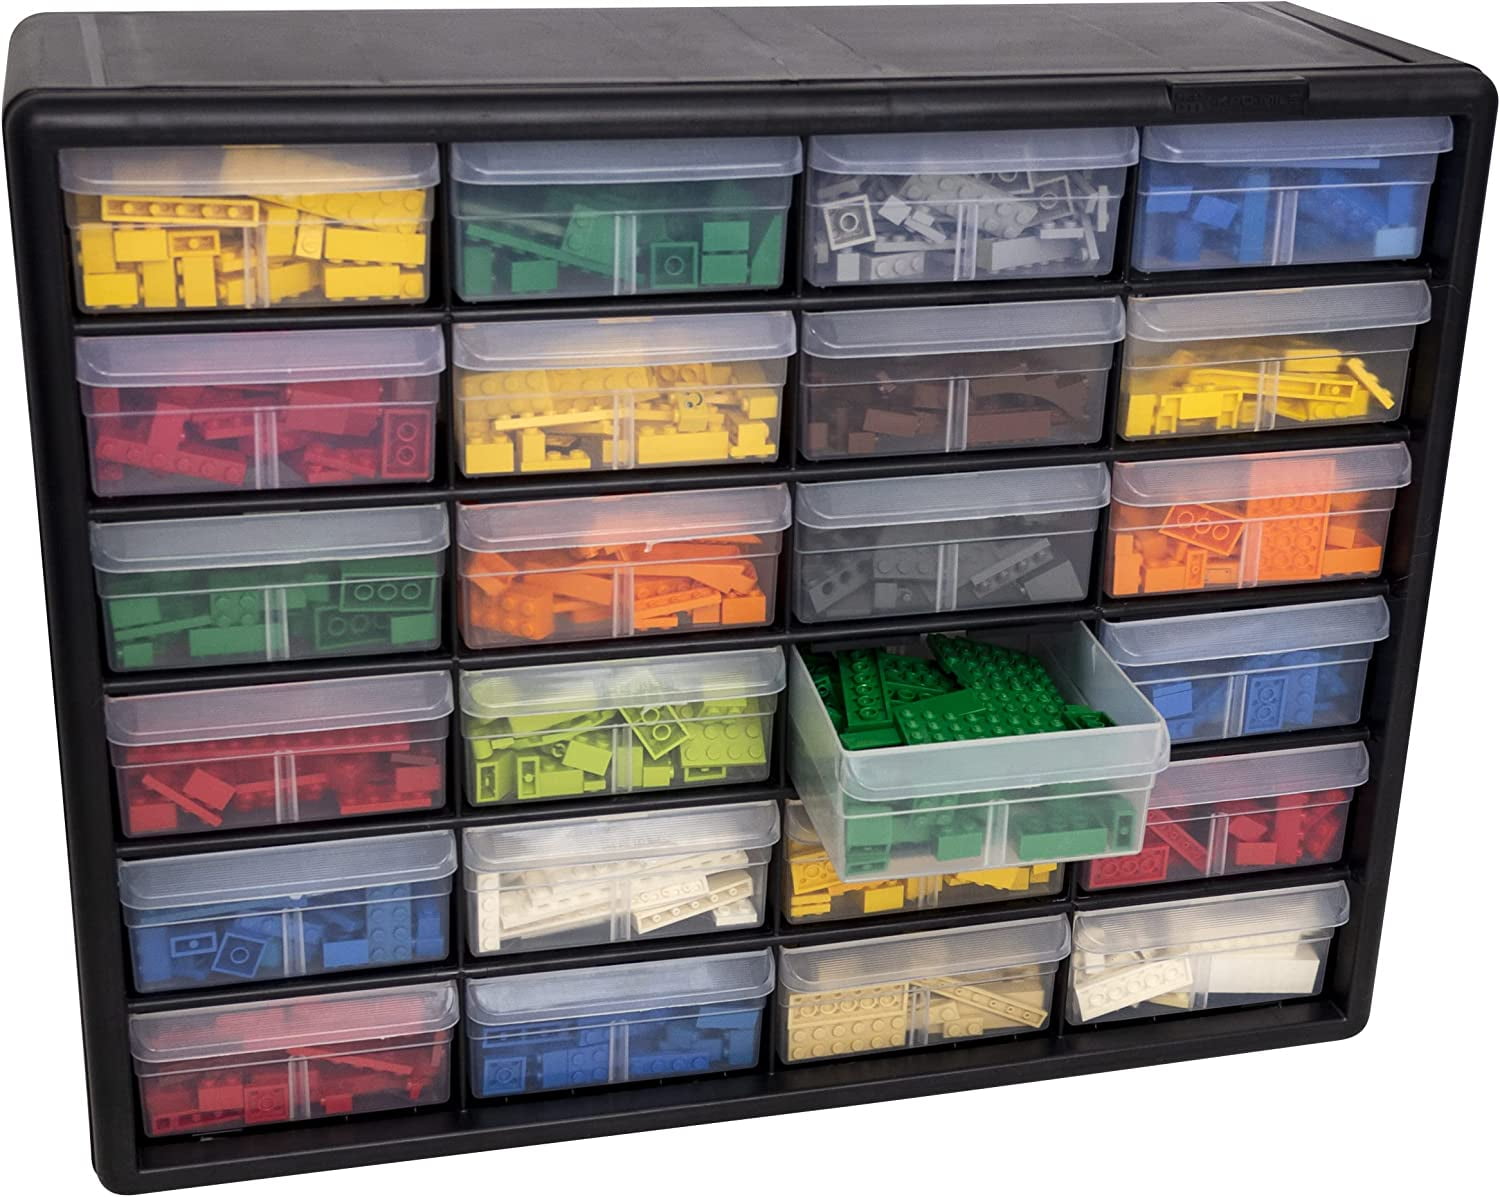 Akro-Mils 24 Drawer Plastic Storage Organizer with Drawers for